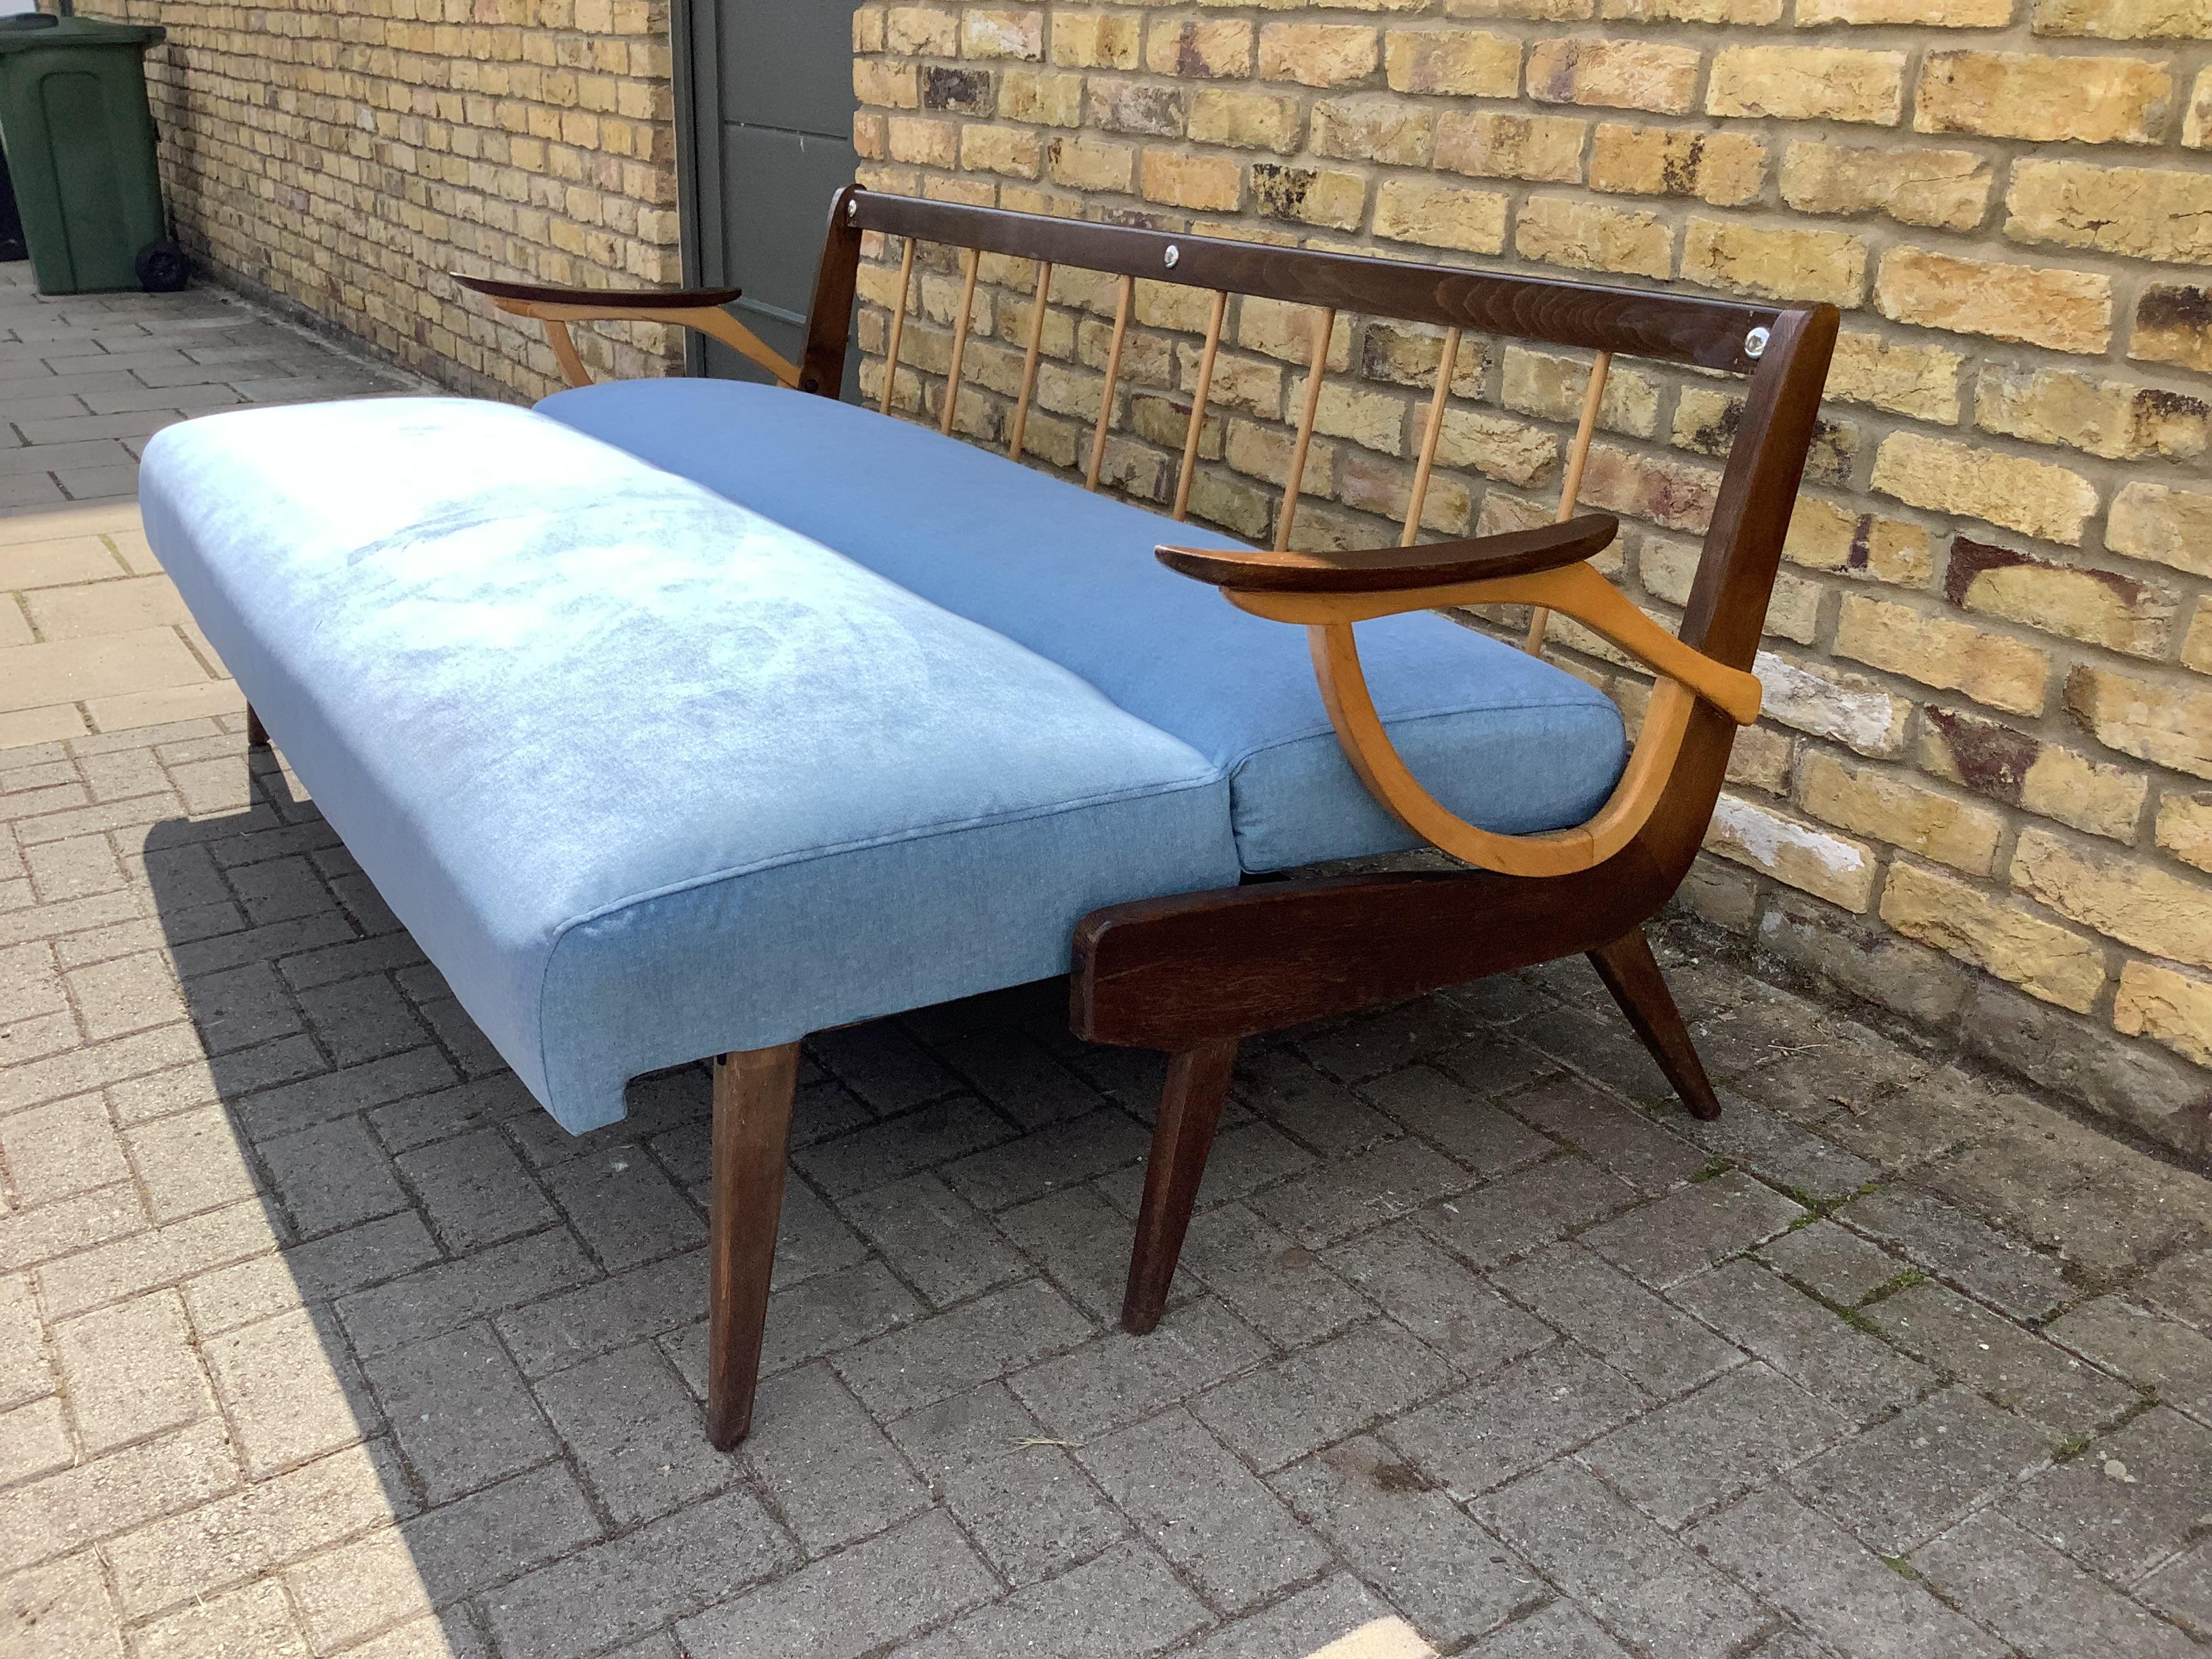 Superbly re upholstered sofa bed with a wonderful light blue cotton fabric, easily goes from a sofa to a comfortable bed .strong foam and useful function.Cc1950s